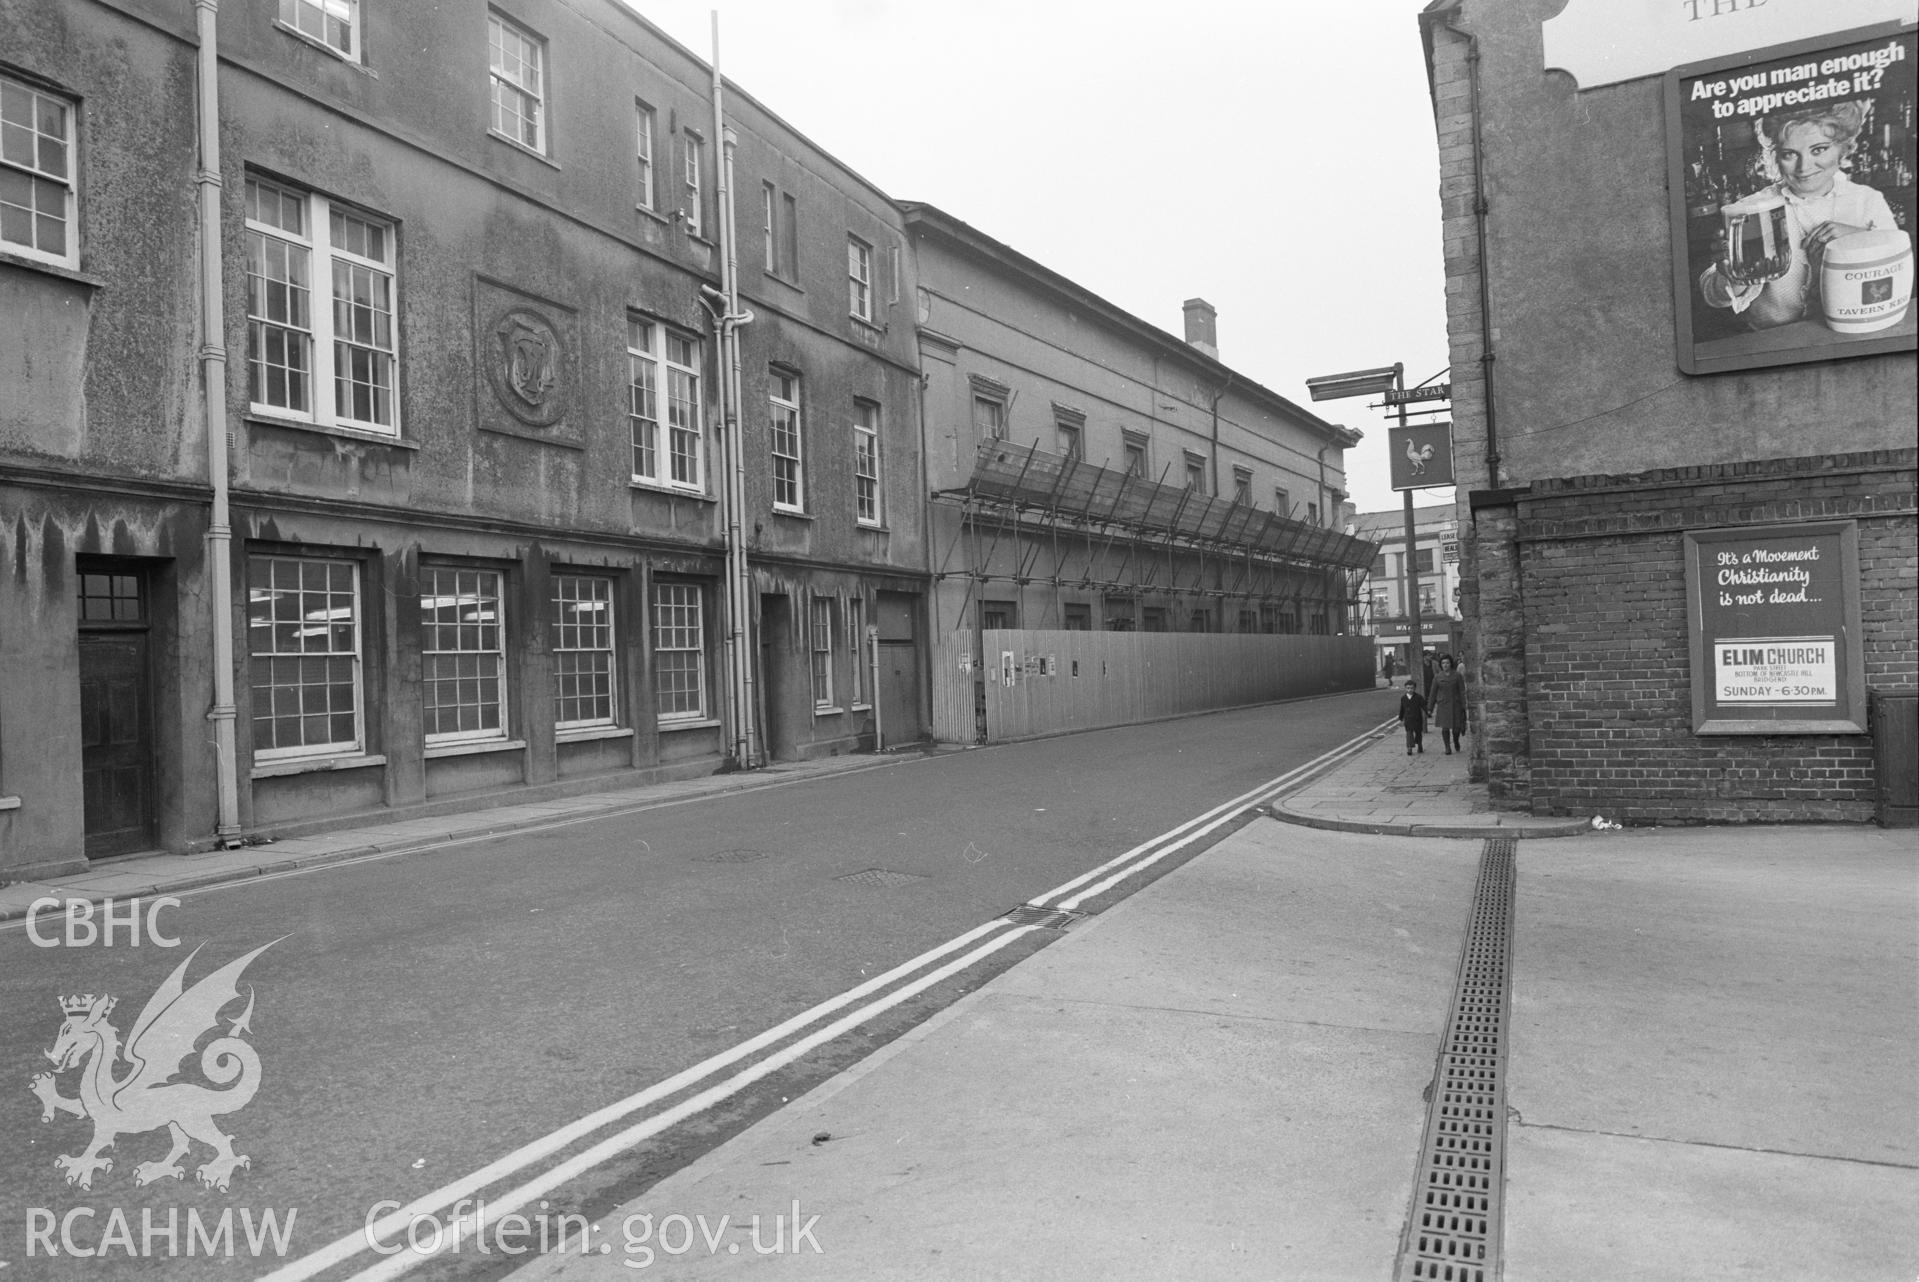 Digital copy of a black and white negative showing view of street in Bridgend.